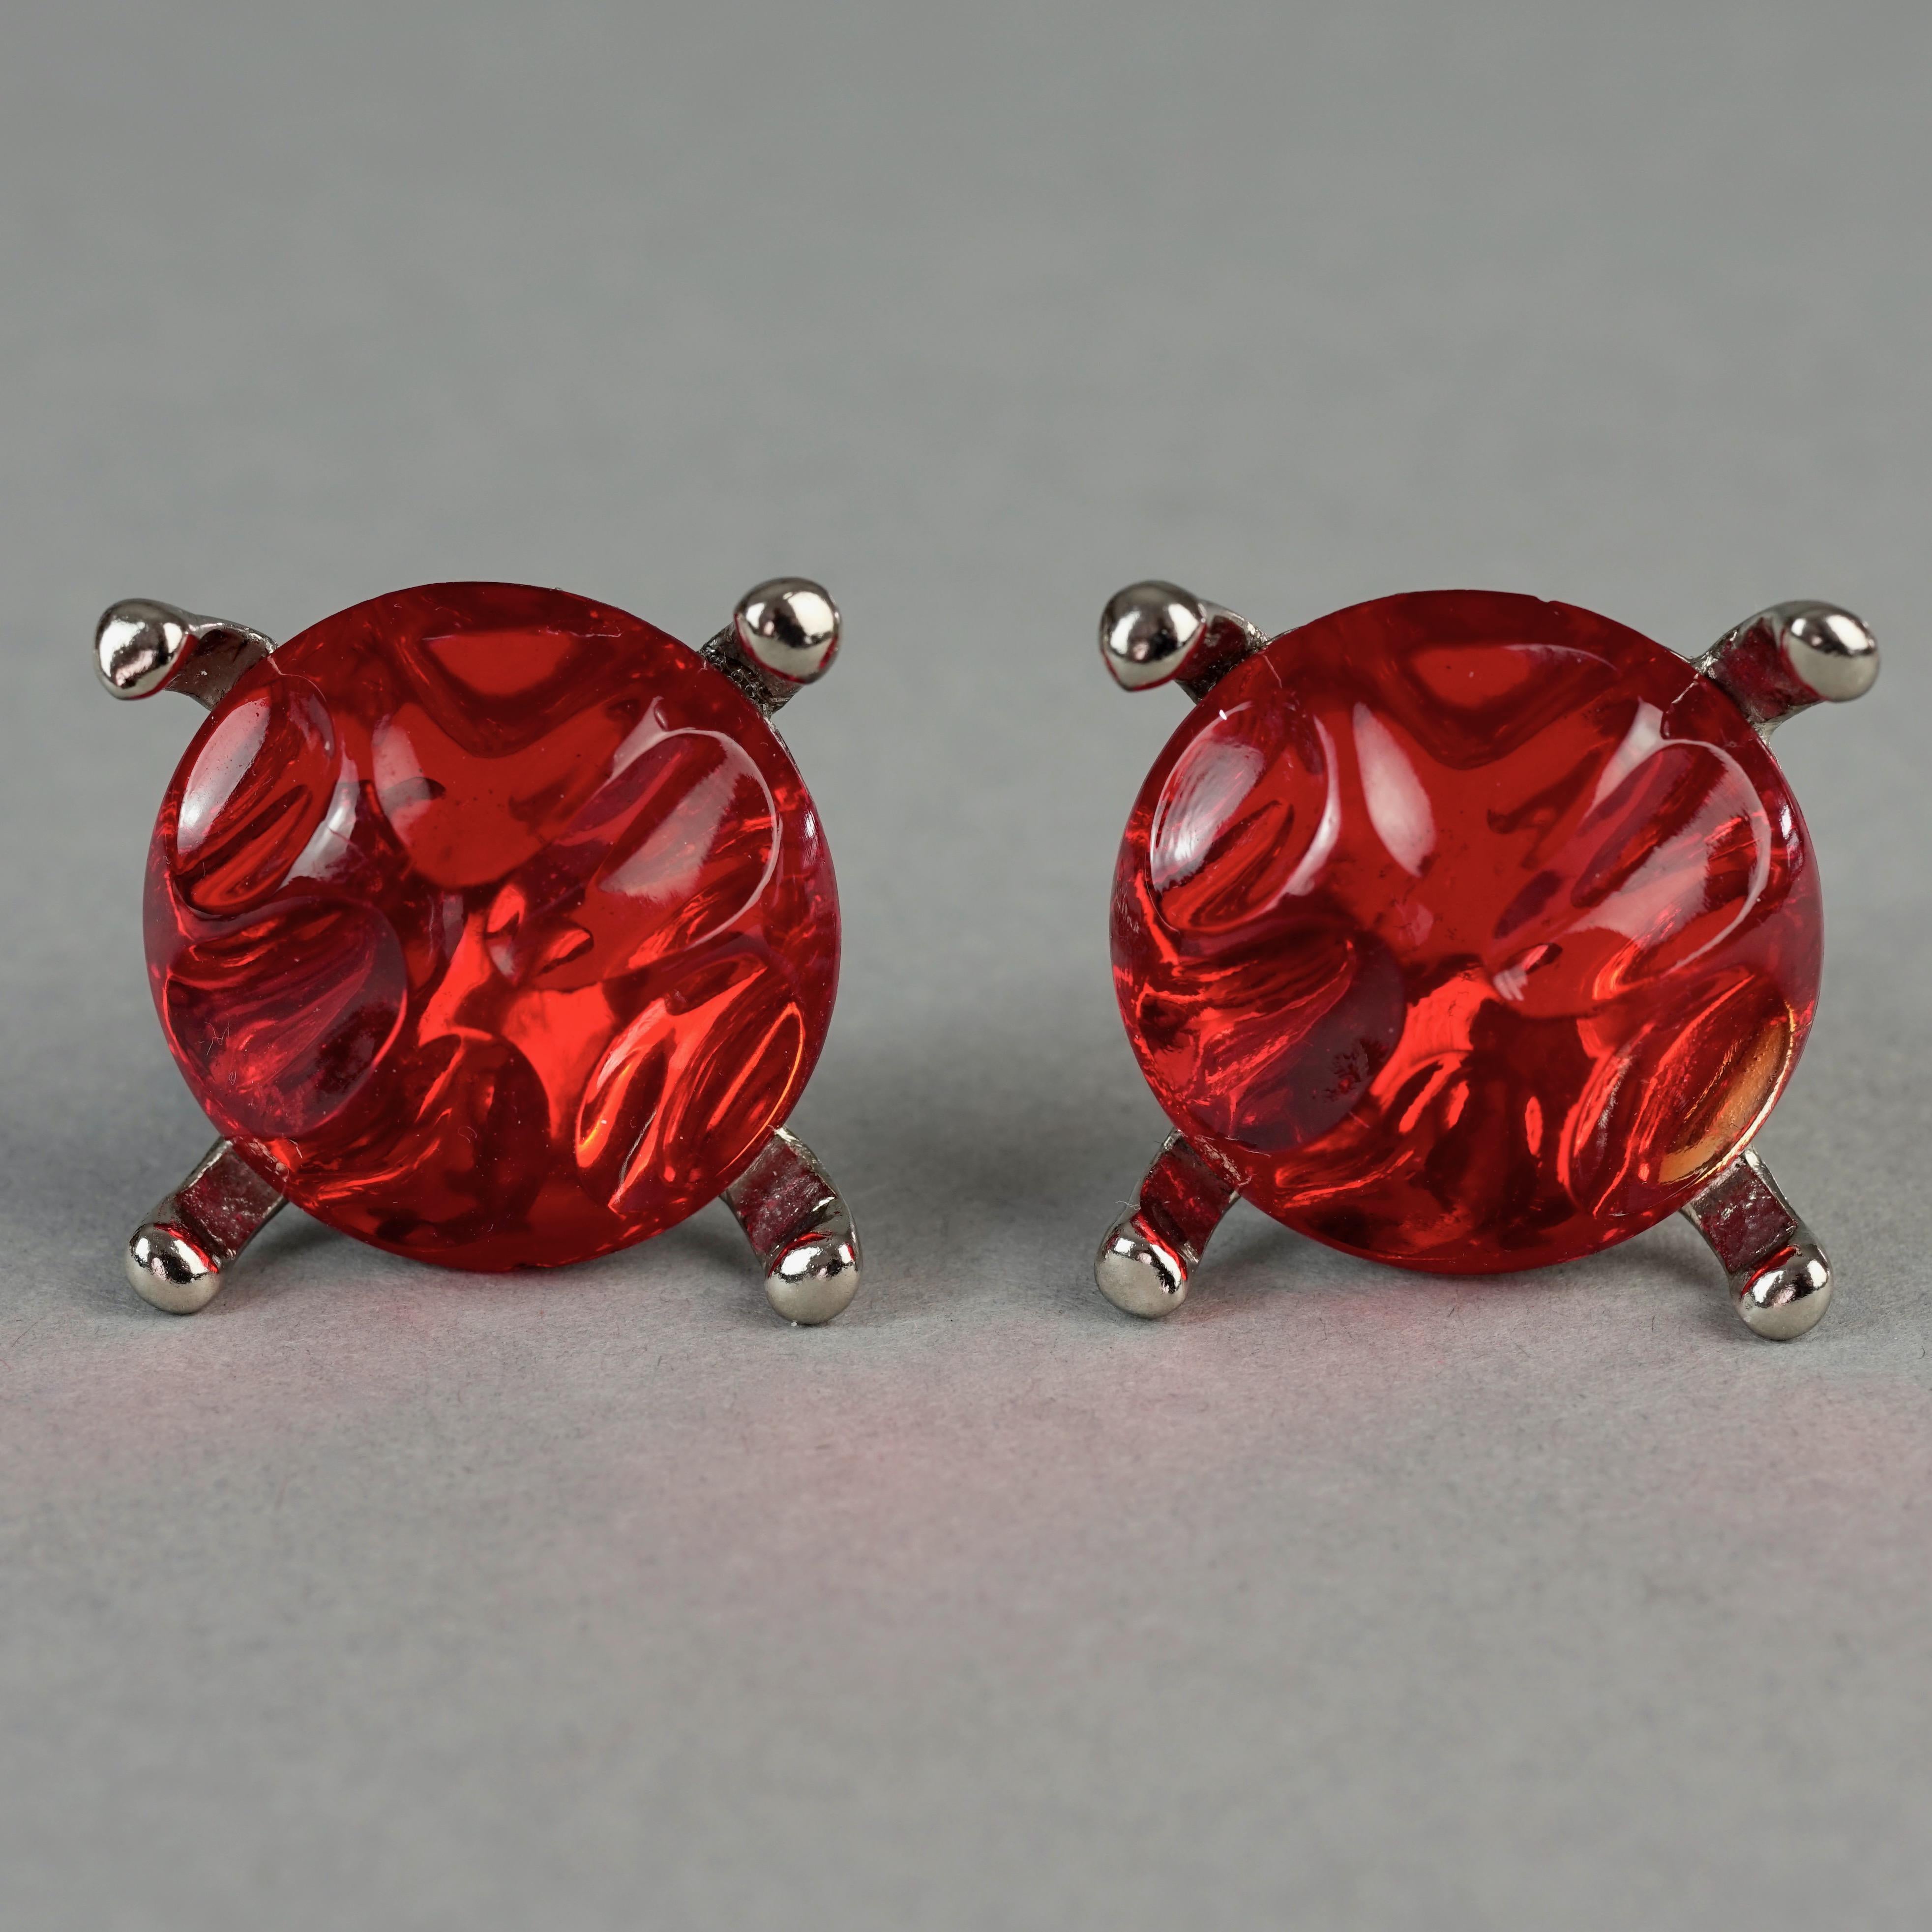 Vintage YVES SAINT LAURENT Ysl Irregular Red Glass Cabochon Earrings In Good Condition For Sale In Kingersheim, Alsace